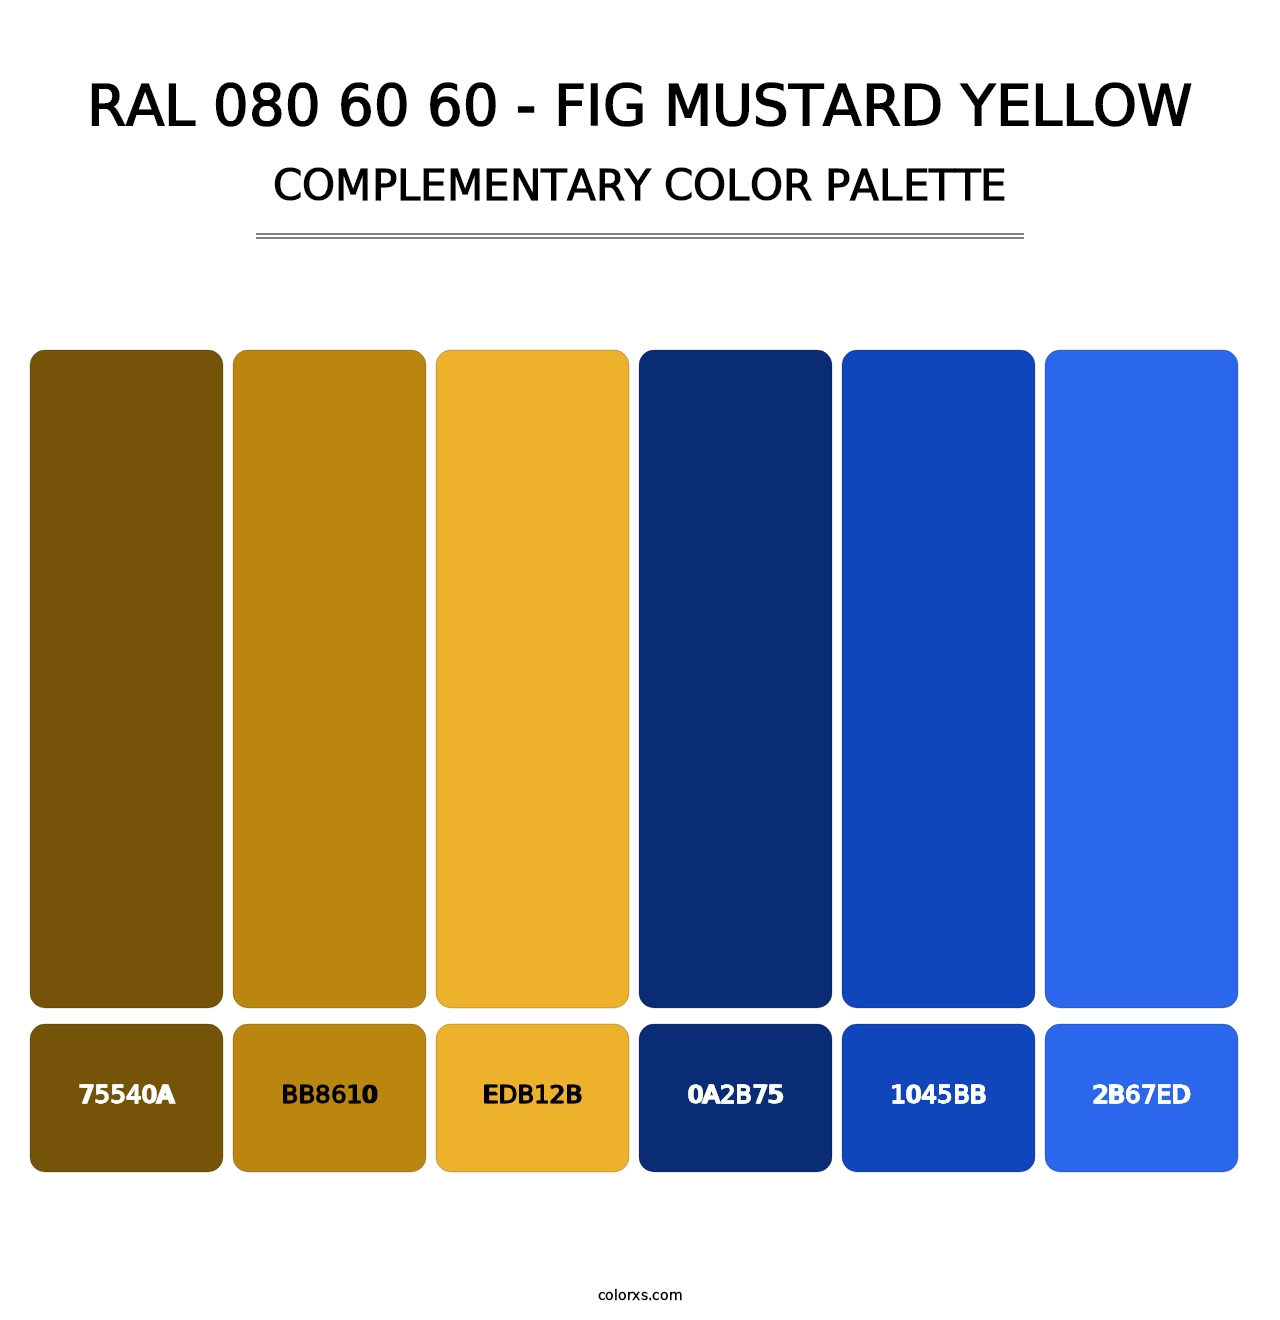 RAL 080 60 60 - Fig Mustard Yellow - Complementary Color Palette